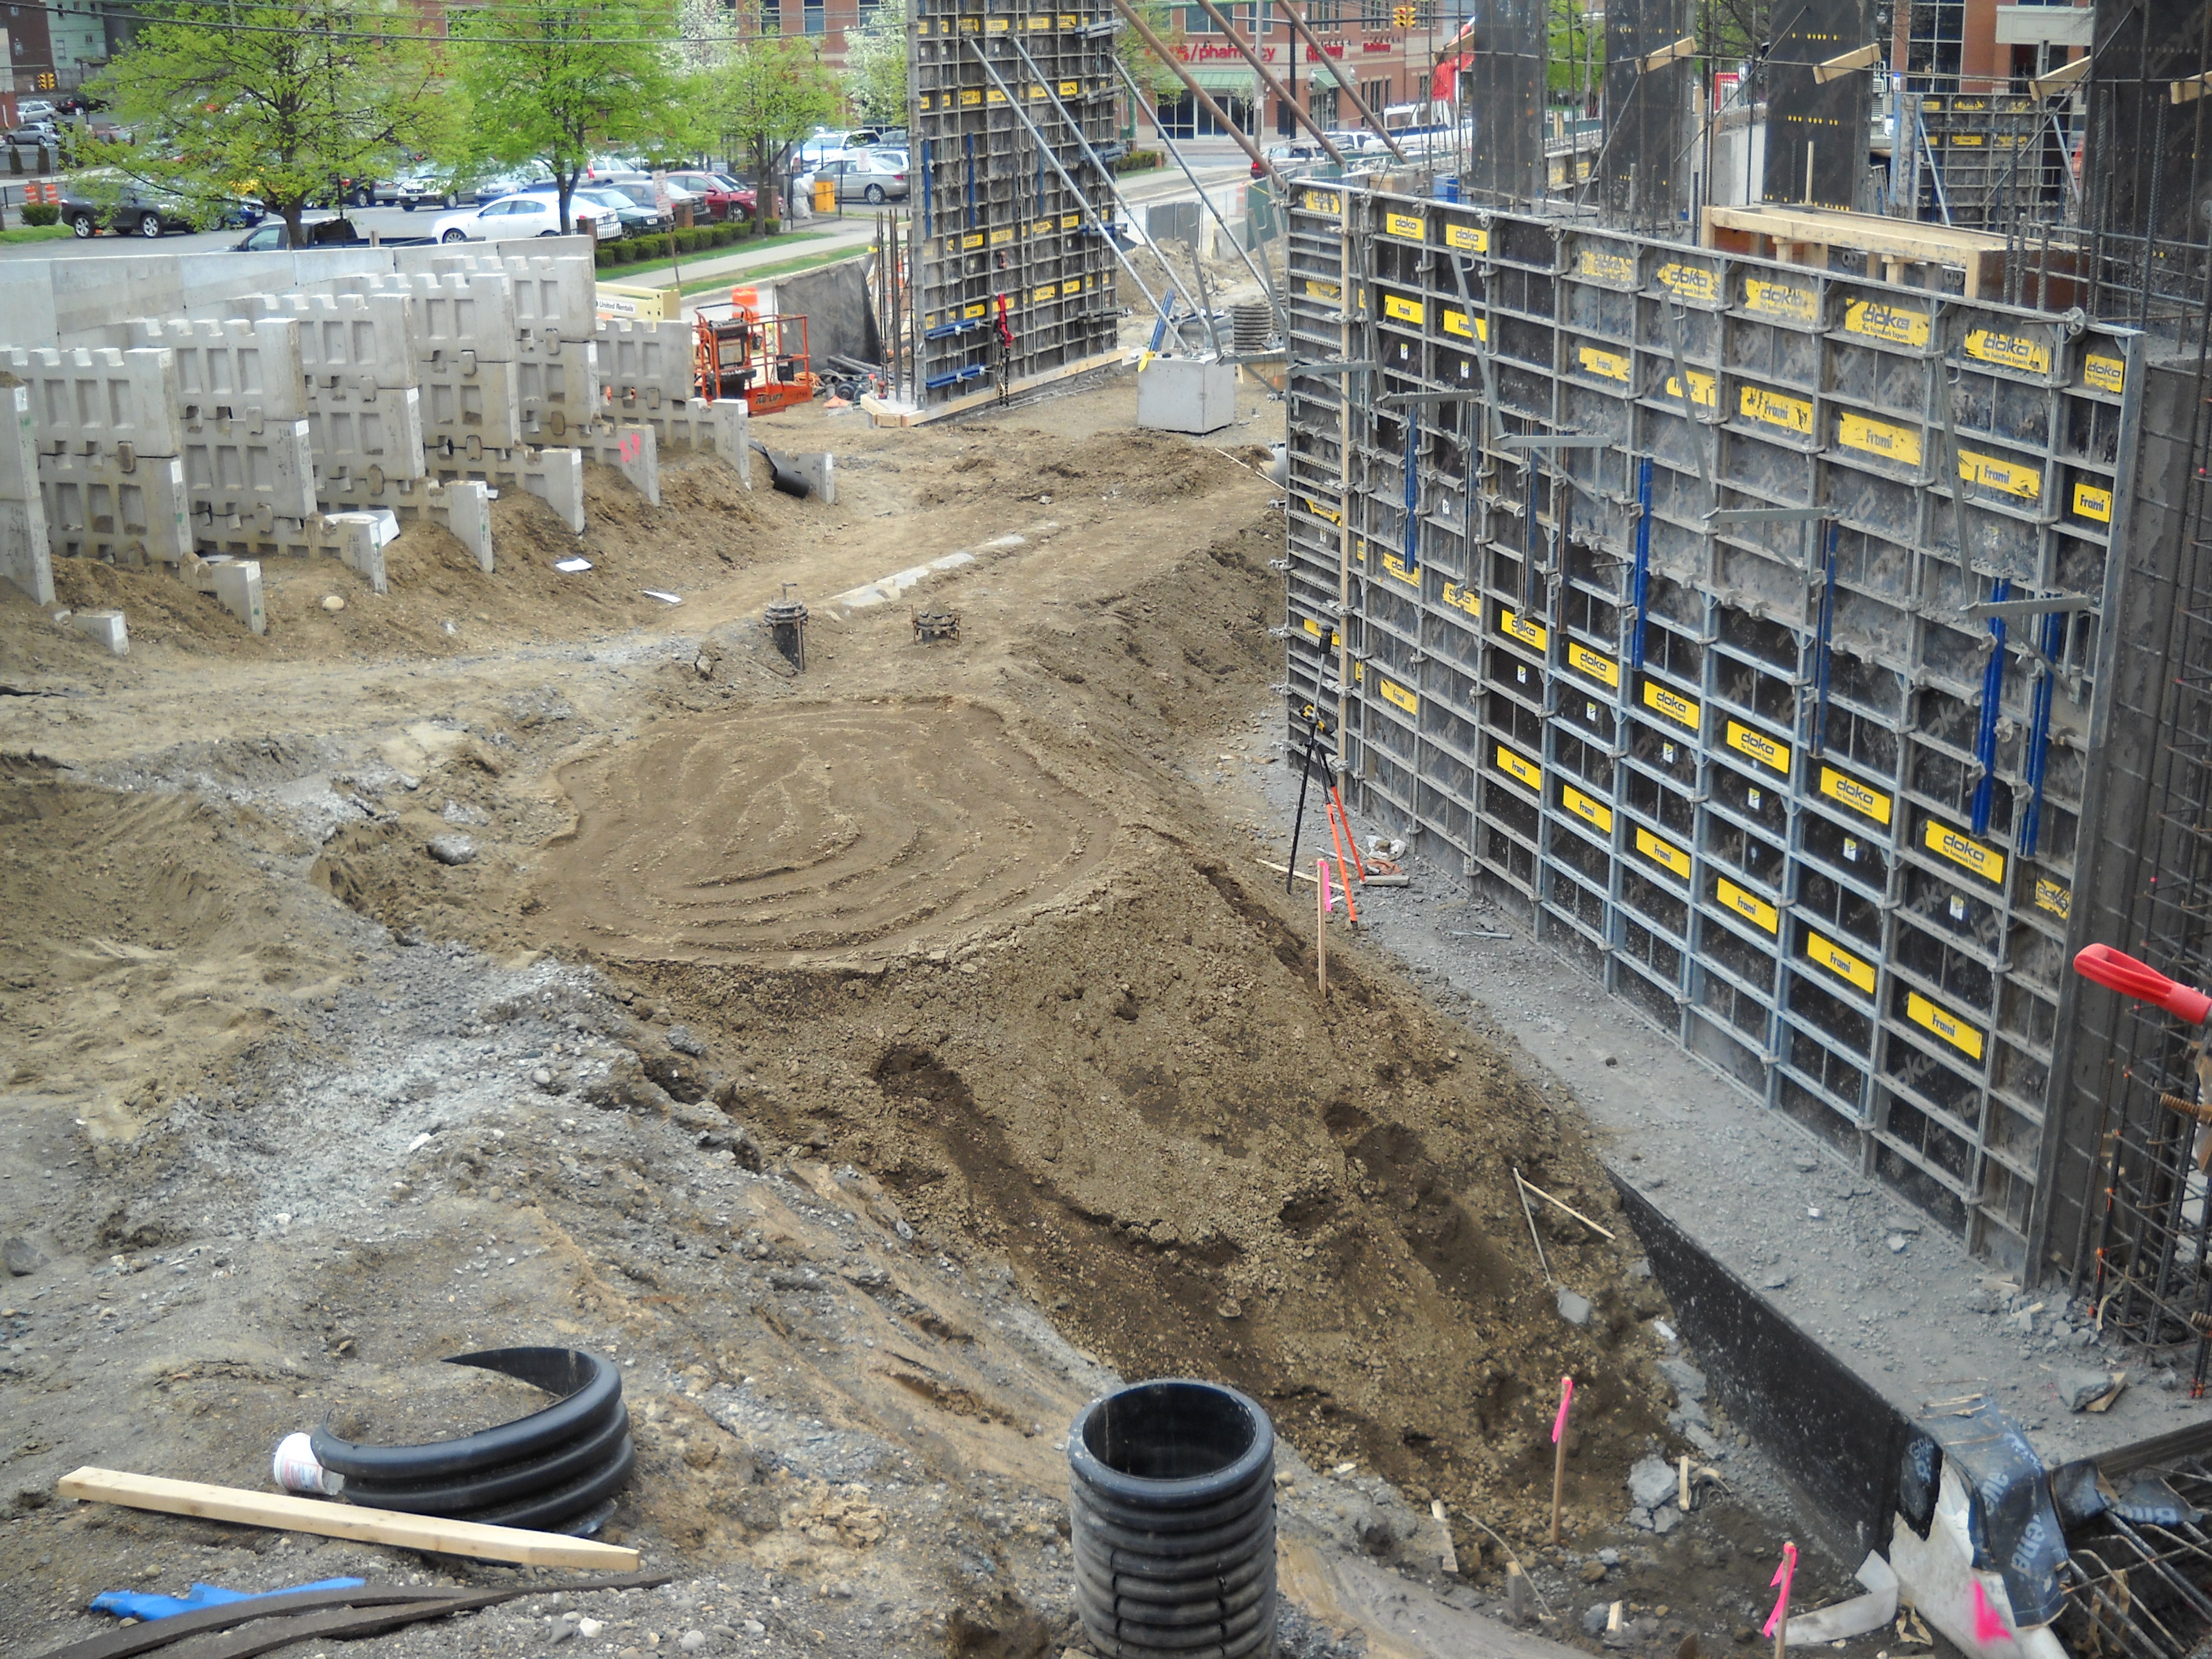 John P. Stopen Albany Medical Center Healthcare Project expansion